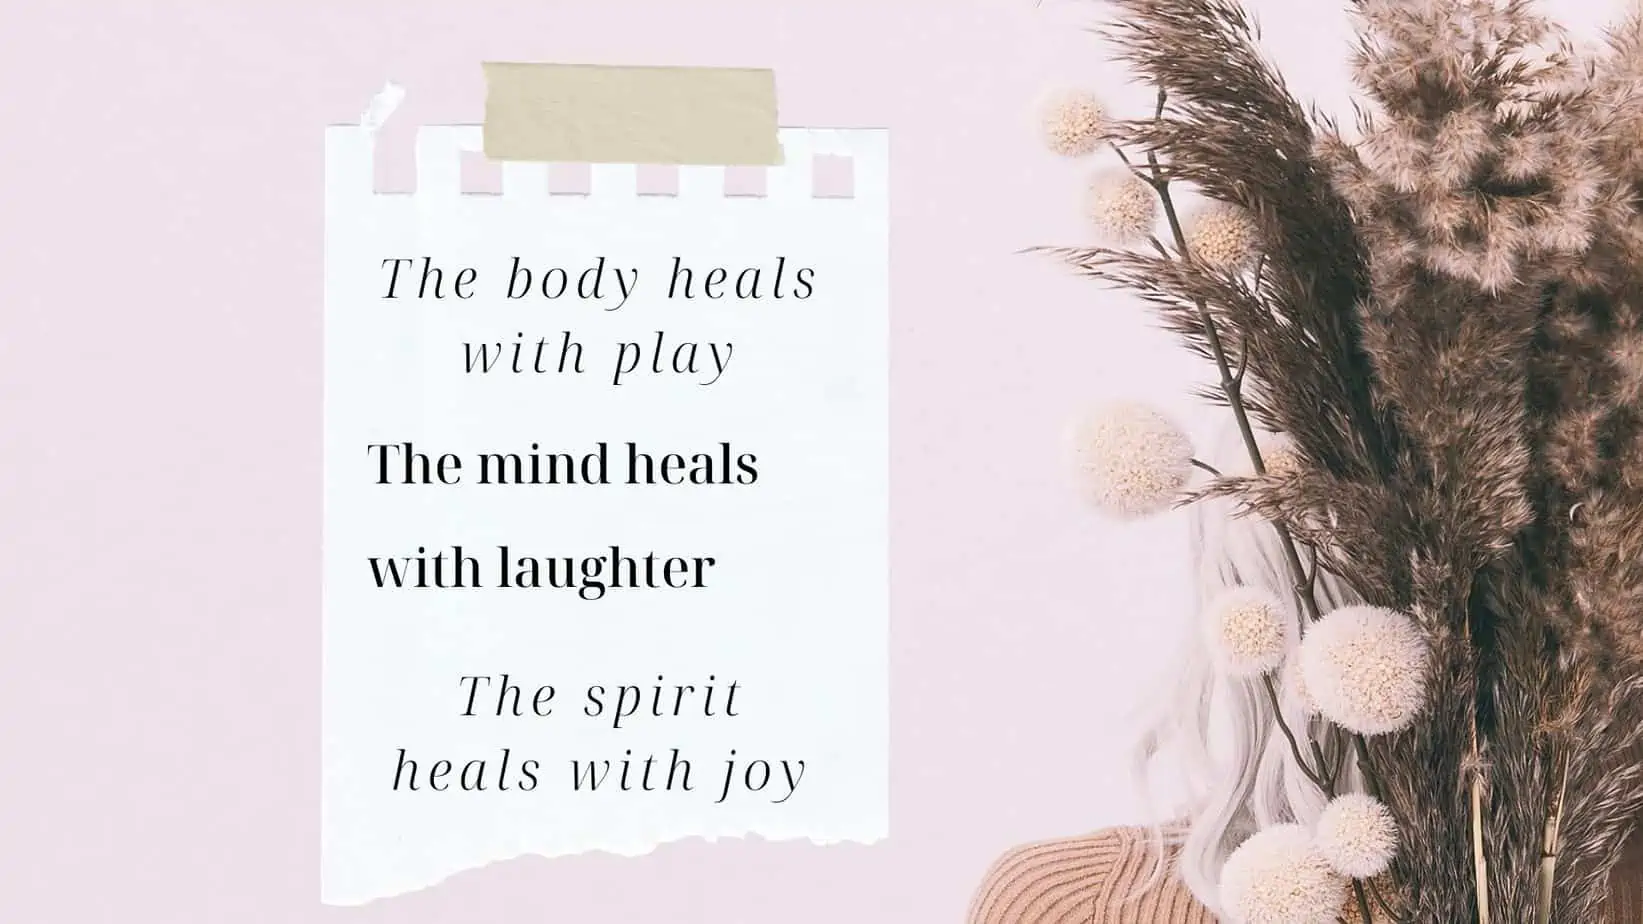 The Body Heals With Play, The Mind Heals With Laughter, and The Spirit Heals With Joy